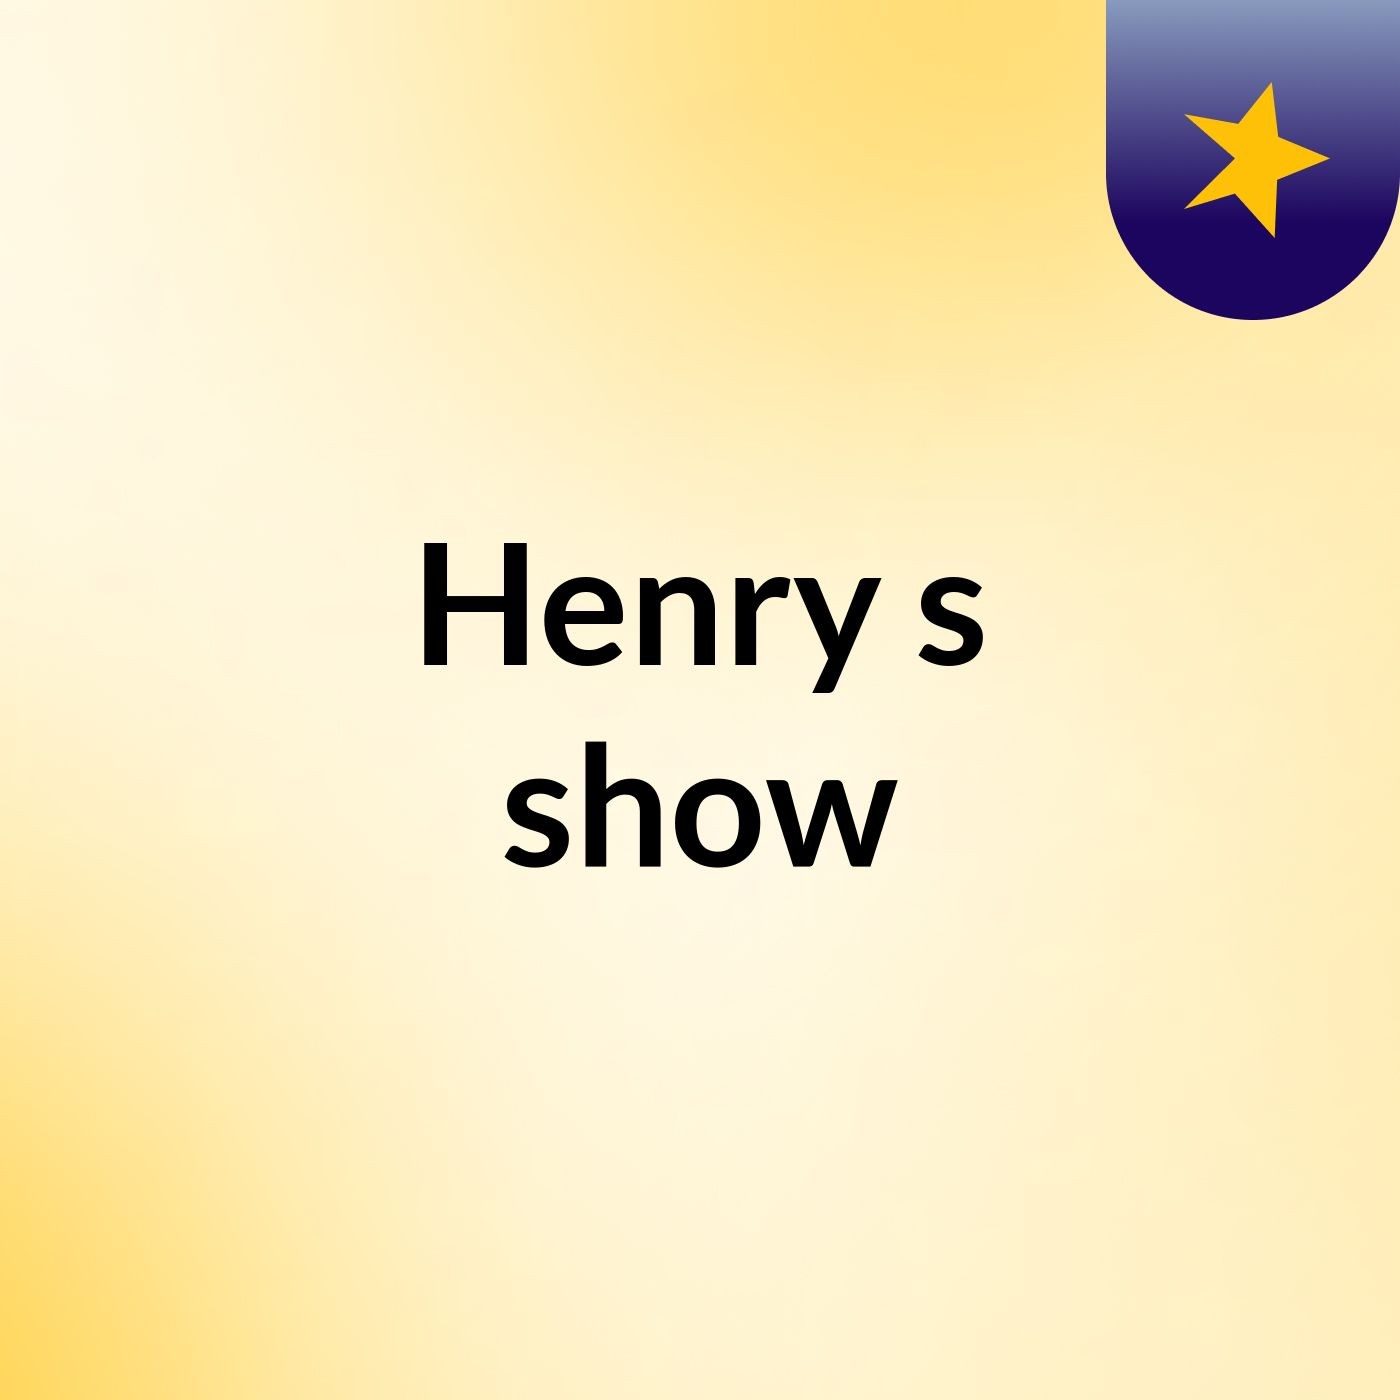 Henry's show